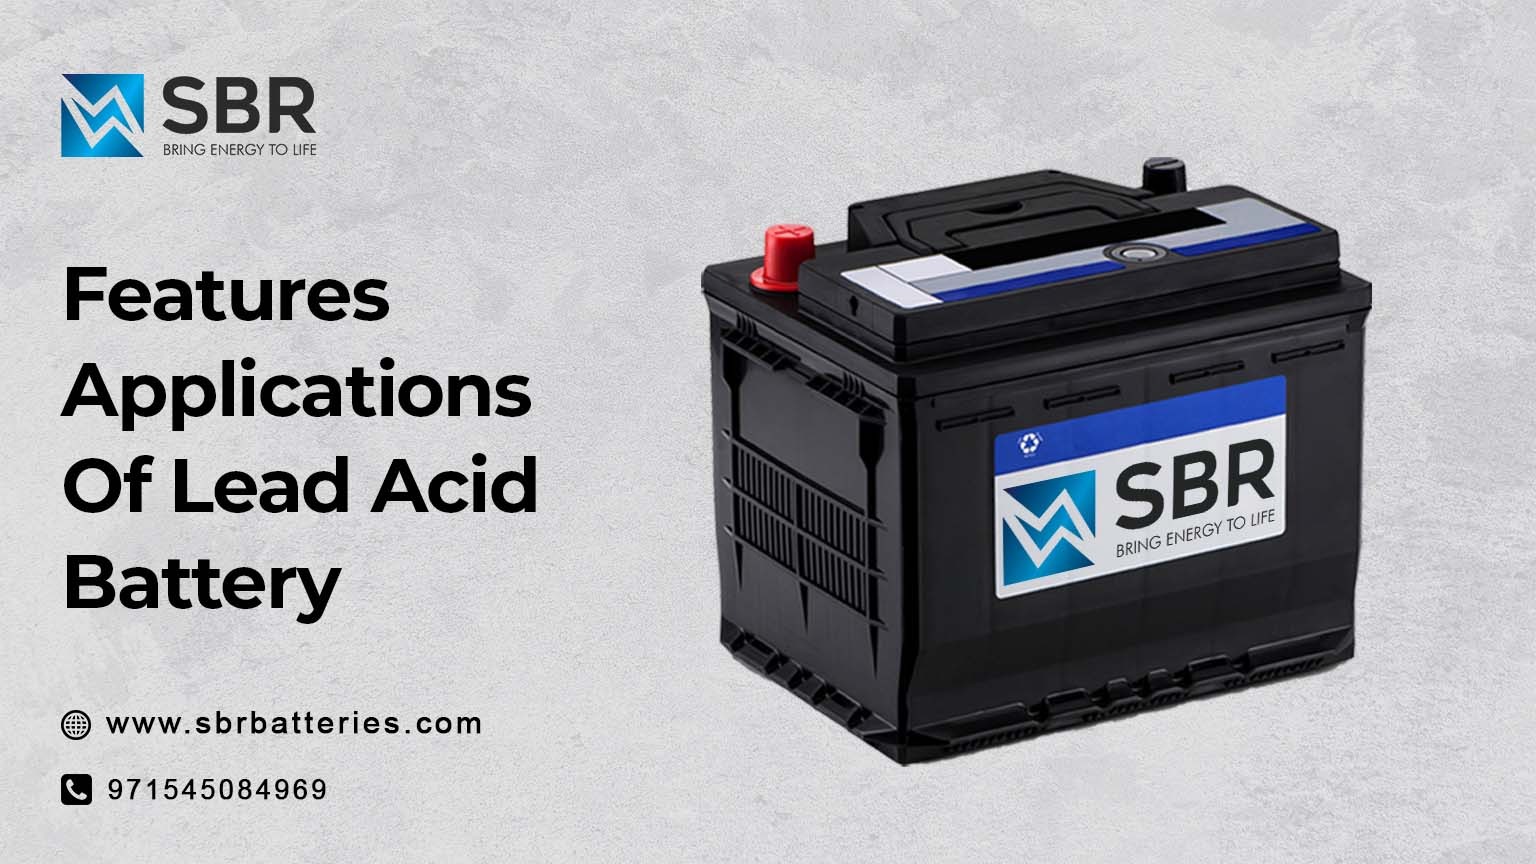 Features and Applications of Lead Acid Battery - sbrbatteries